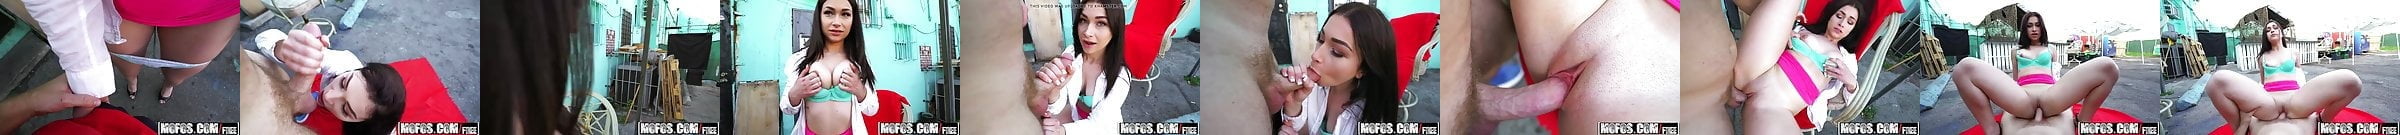 Featured Public Pick Ups Porn Videos 2 Xhamster